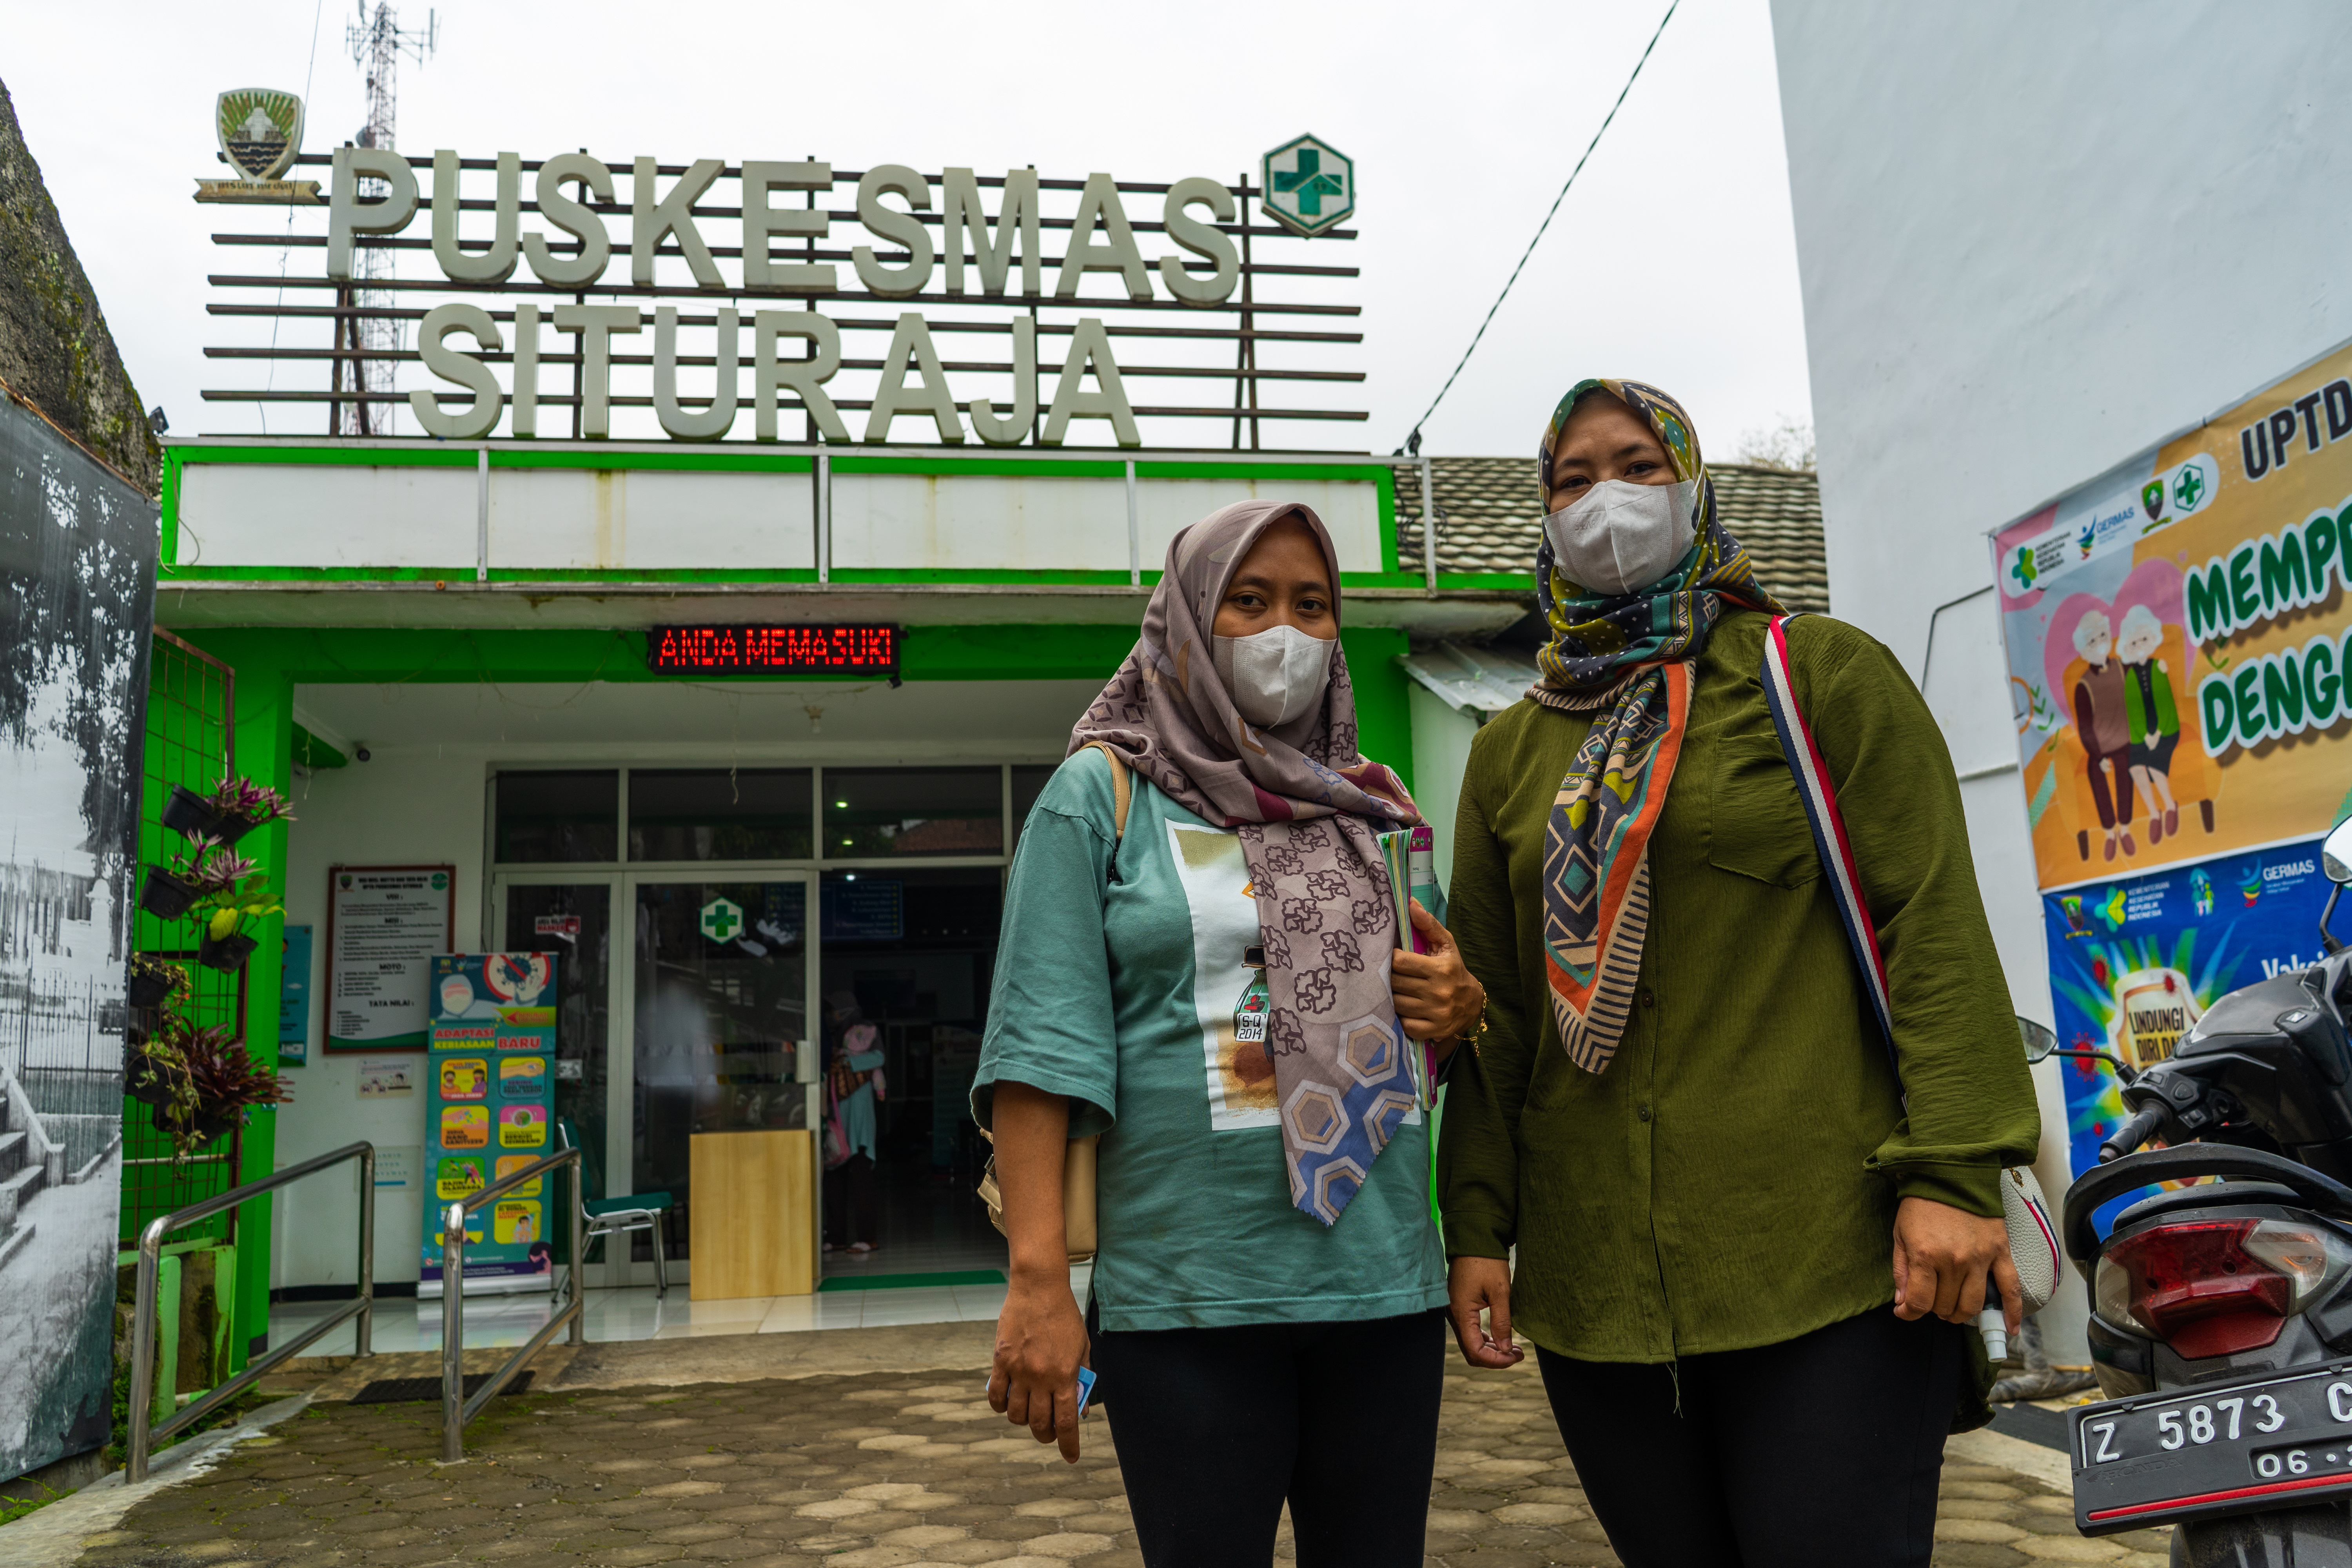 Two women stand facing the camera in front of a health center